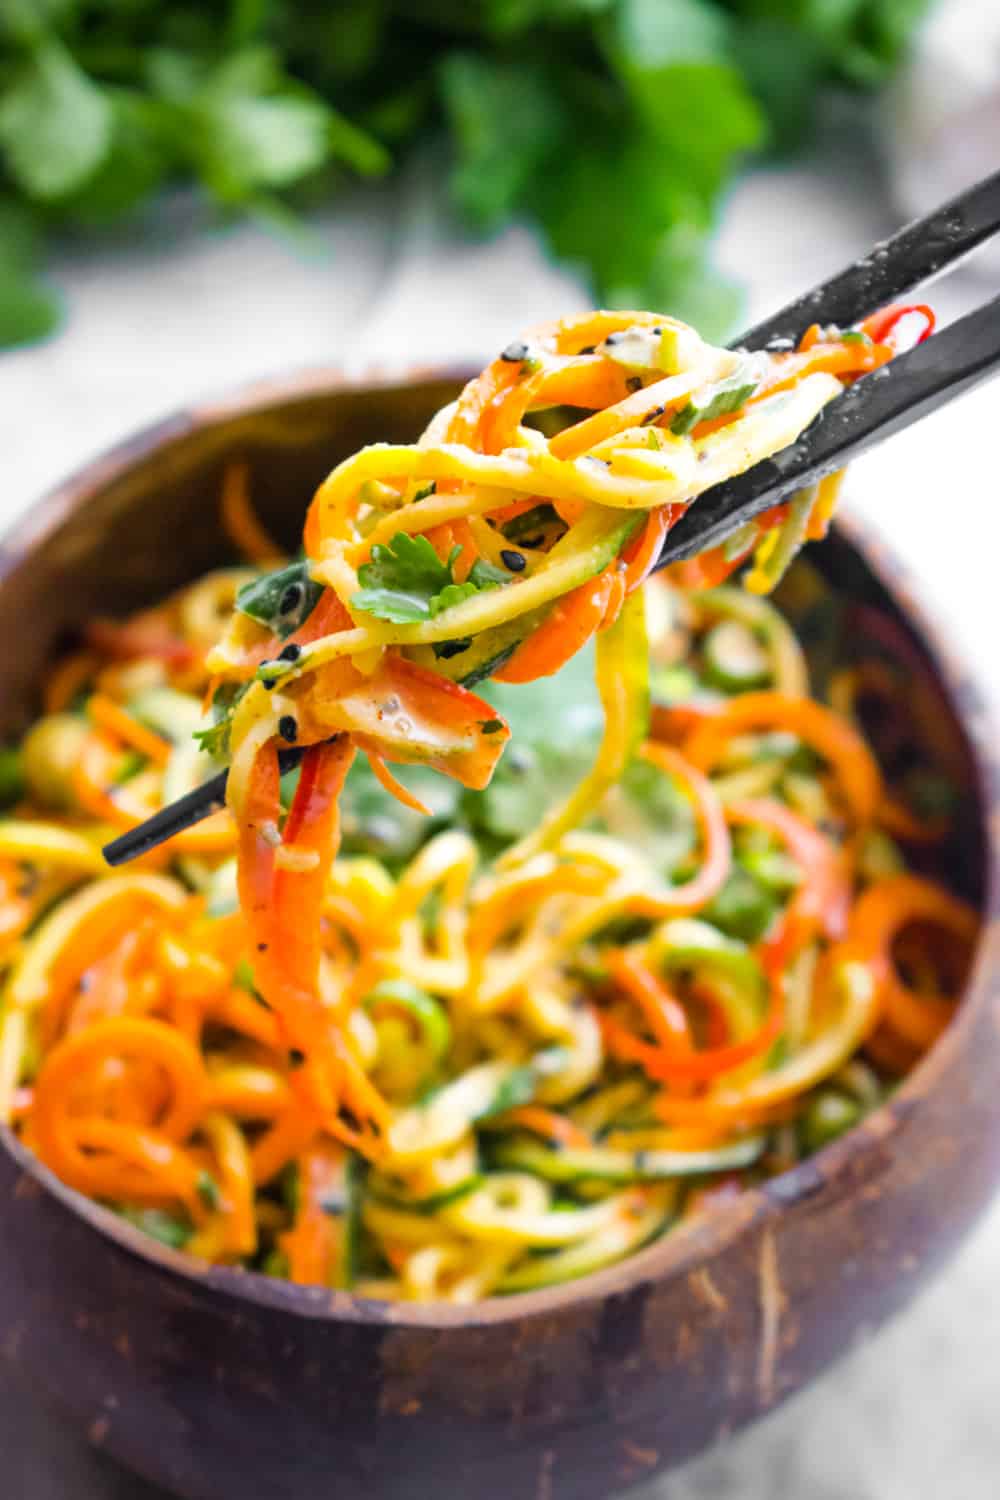 Chopsticks holding up zucchini noodles from a bowl of Asian zucchini noodles.